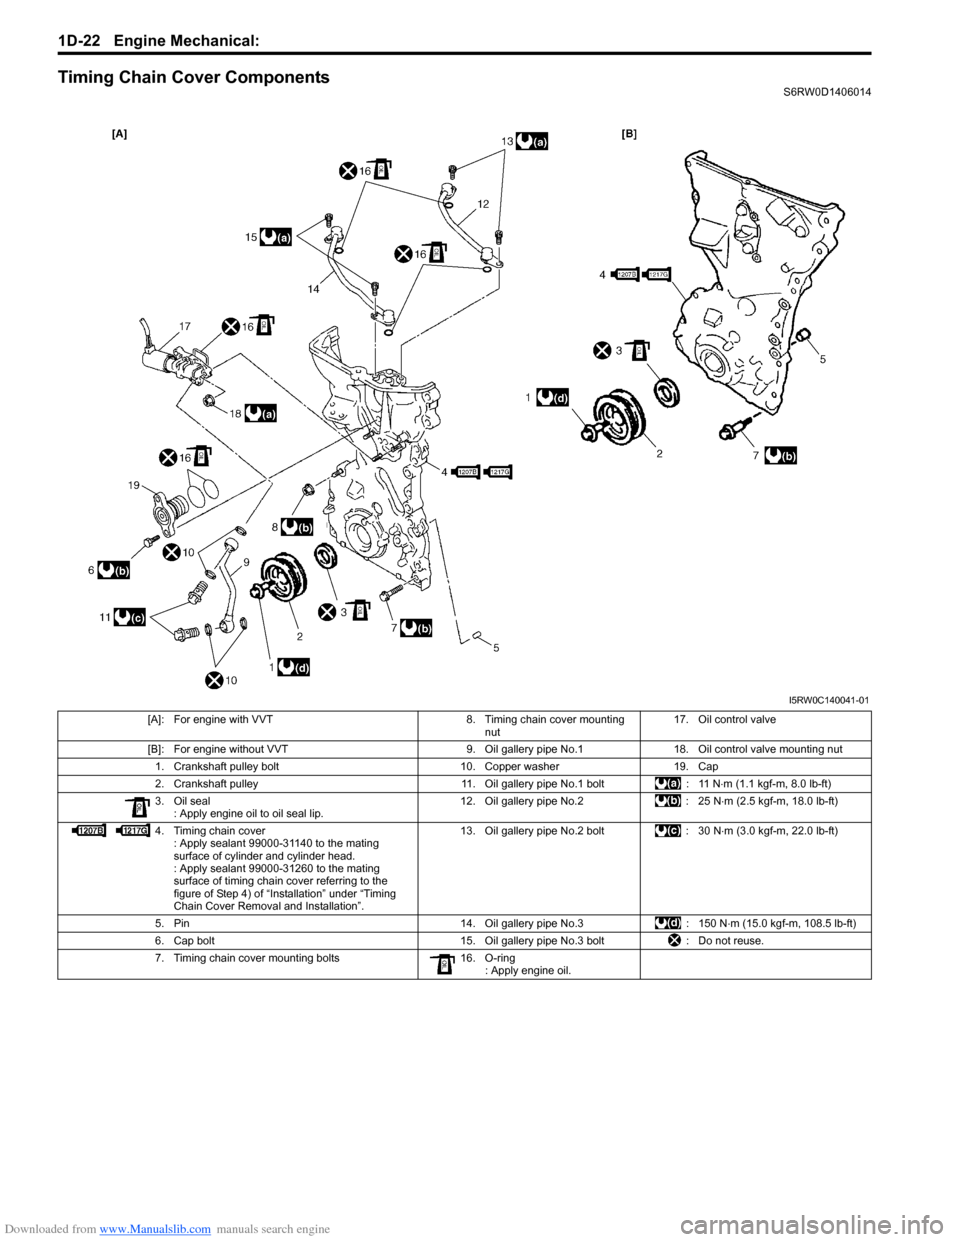 SUZUKI SX4 2006 1.G Service Workshop Manual Downloaded from www.Manualslib.com manuals search engine 1D-22 Engine Mechanical: 
Timing Chain Cover ComponentsS6RW0D1406014
I5RW0C140041-01
[A]: For engine with VVT 8. Timing chain cover mounting 
n